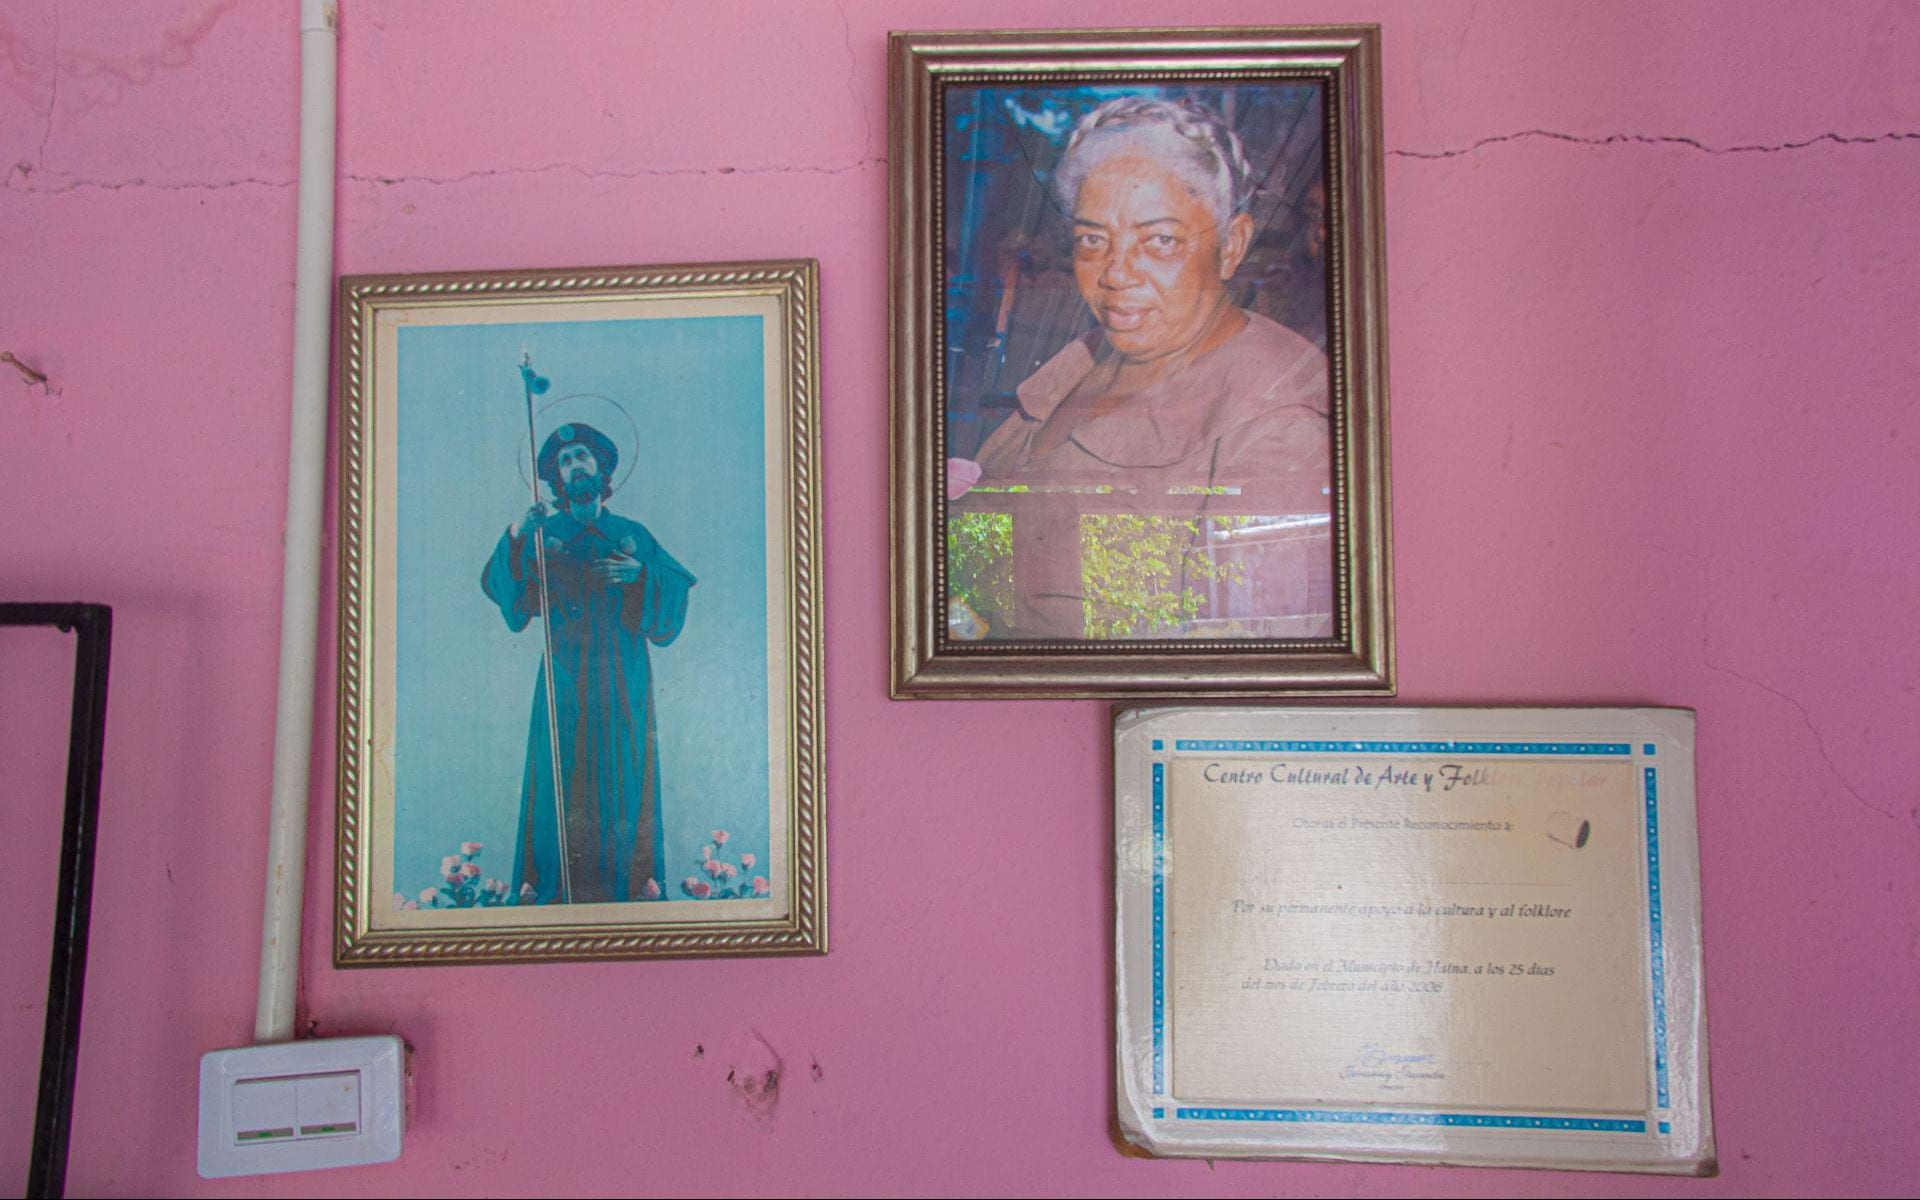 Against a bright pink wall, Graciela's photo, certificate, and a lithograph of Jesus are arranged in frames.